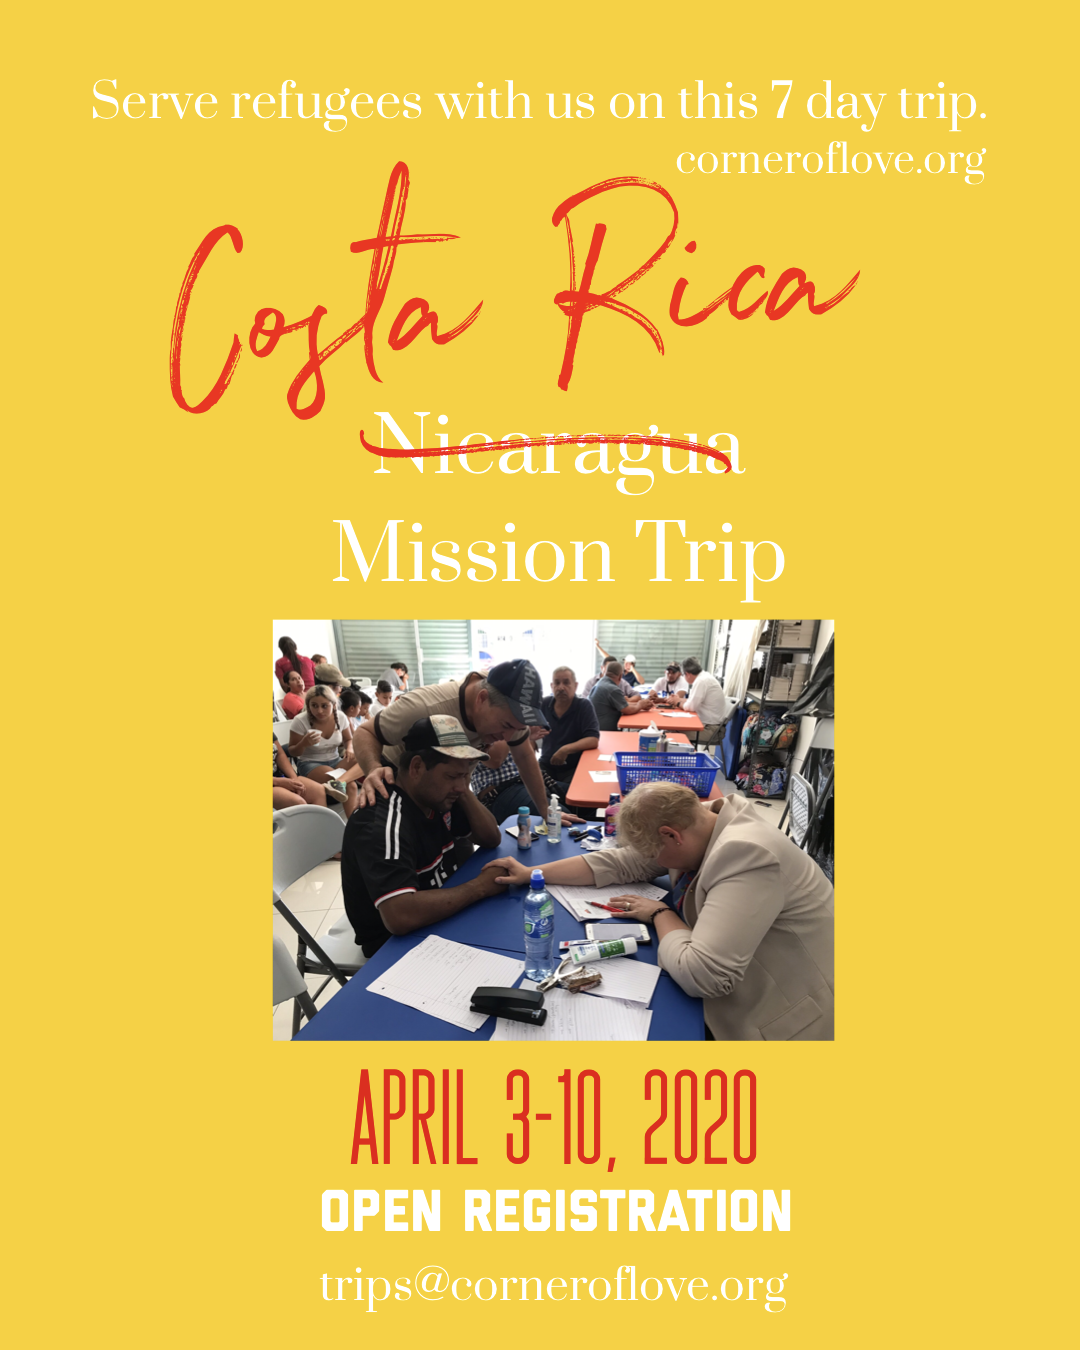 April 2020 Mission Team #1 to Costa Rica